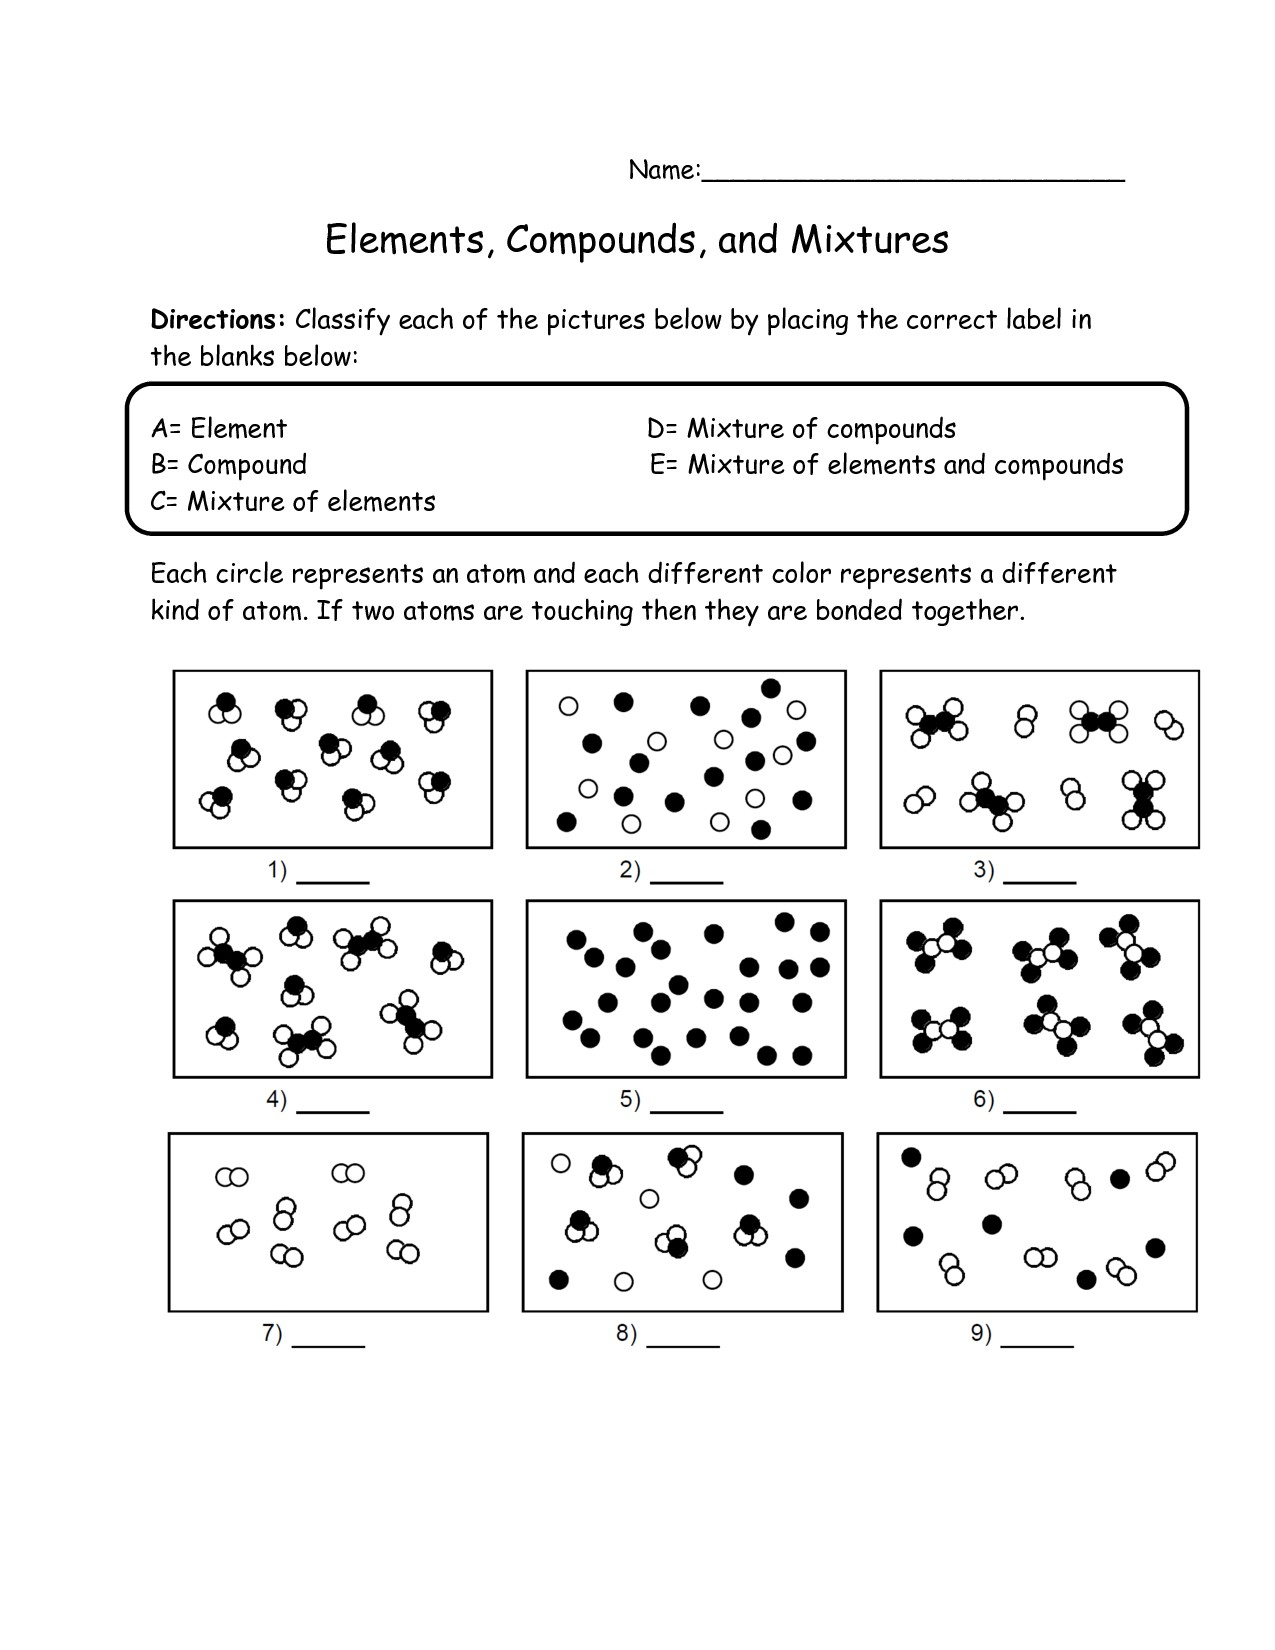 Elements And Compounds And Mixtures Worksheet Answers